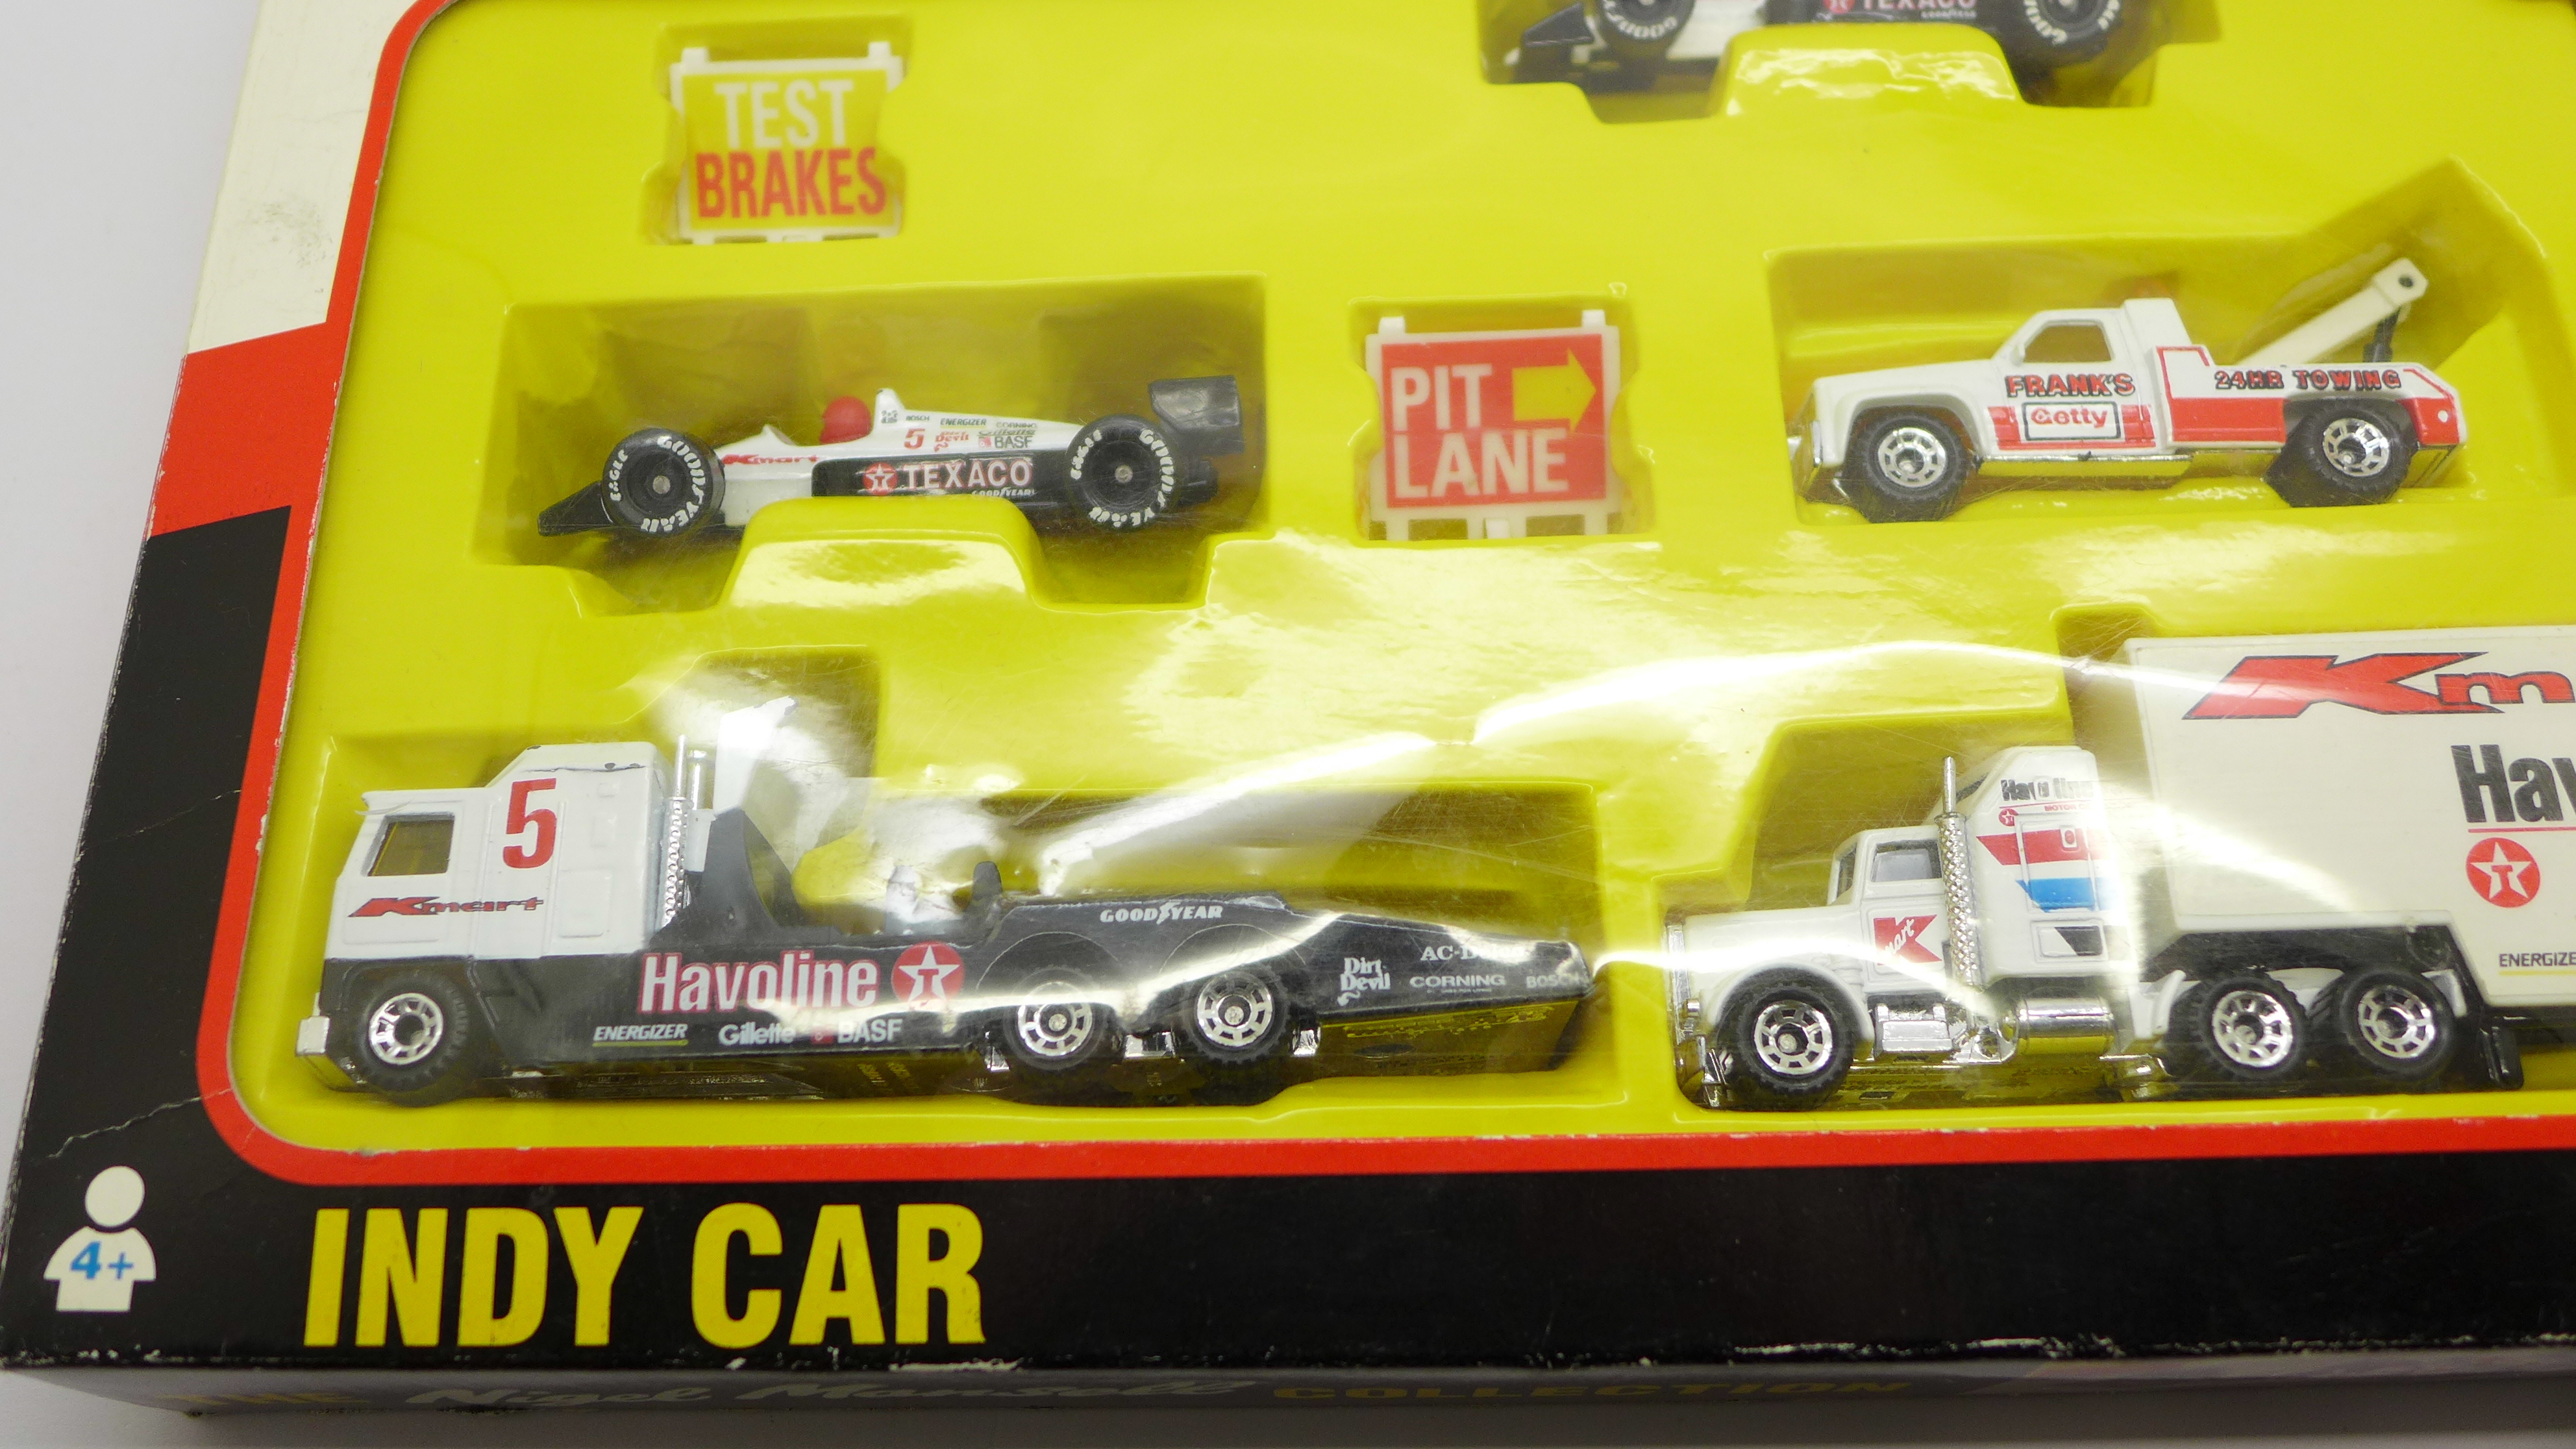 A Matchbox Nigel Mansell Collection Indy Car die-cast model set, boxed - Image 2 of 6